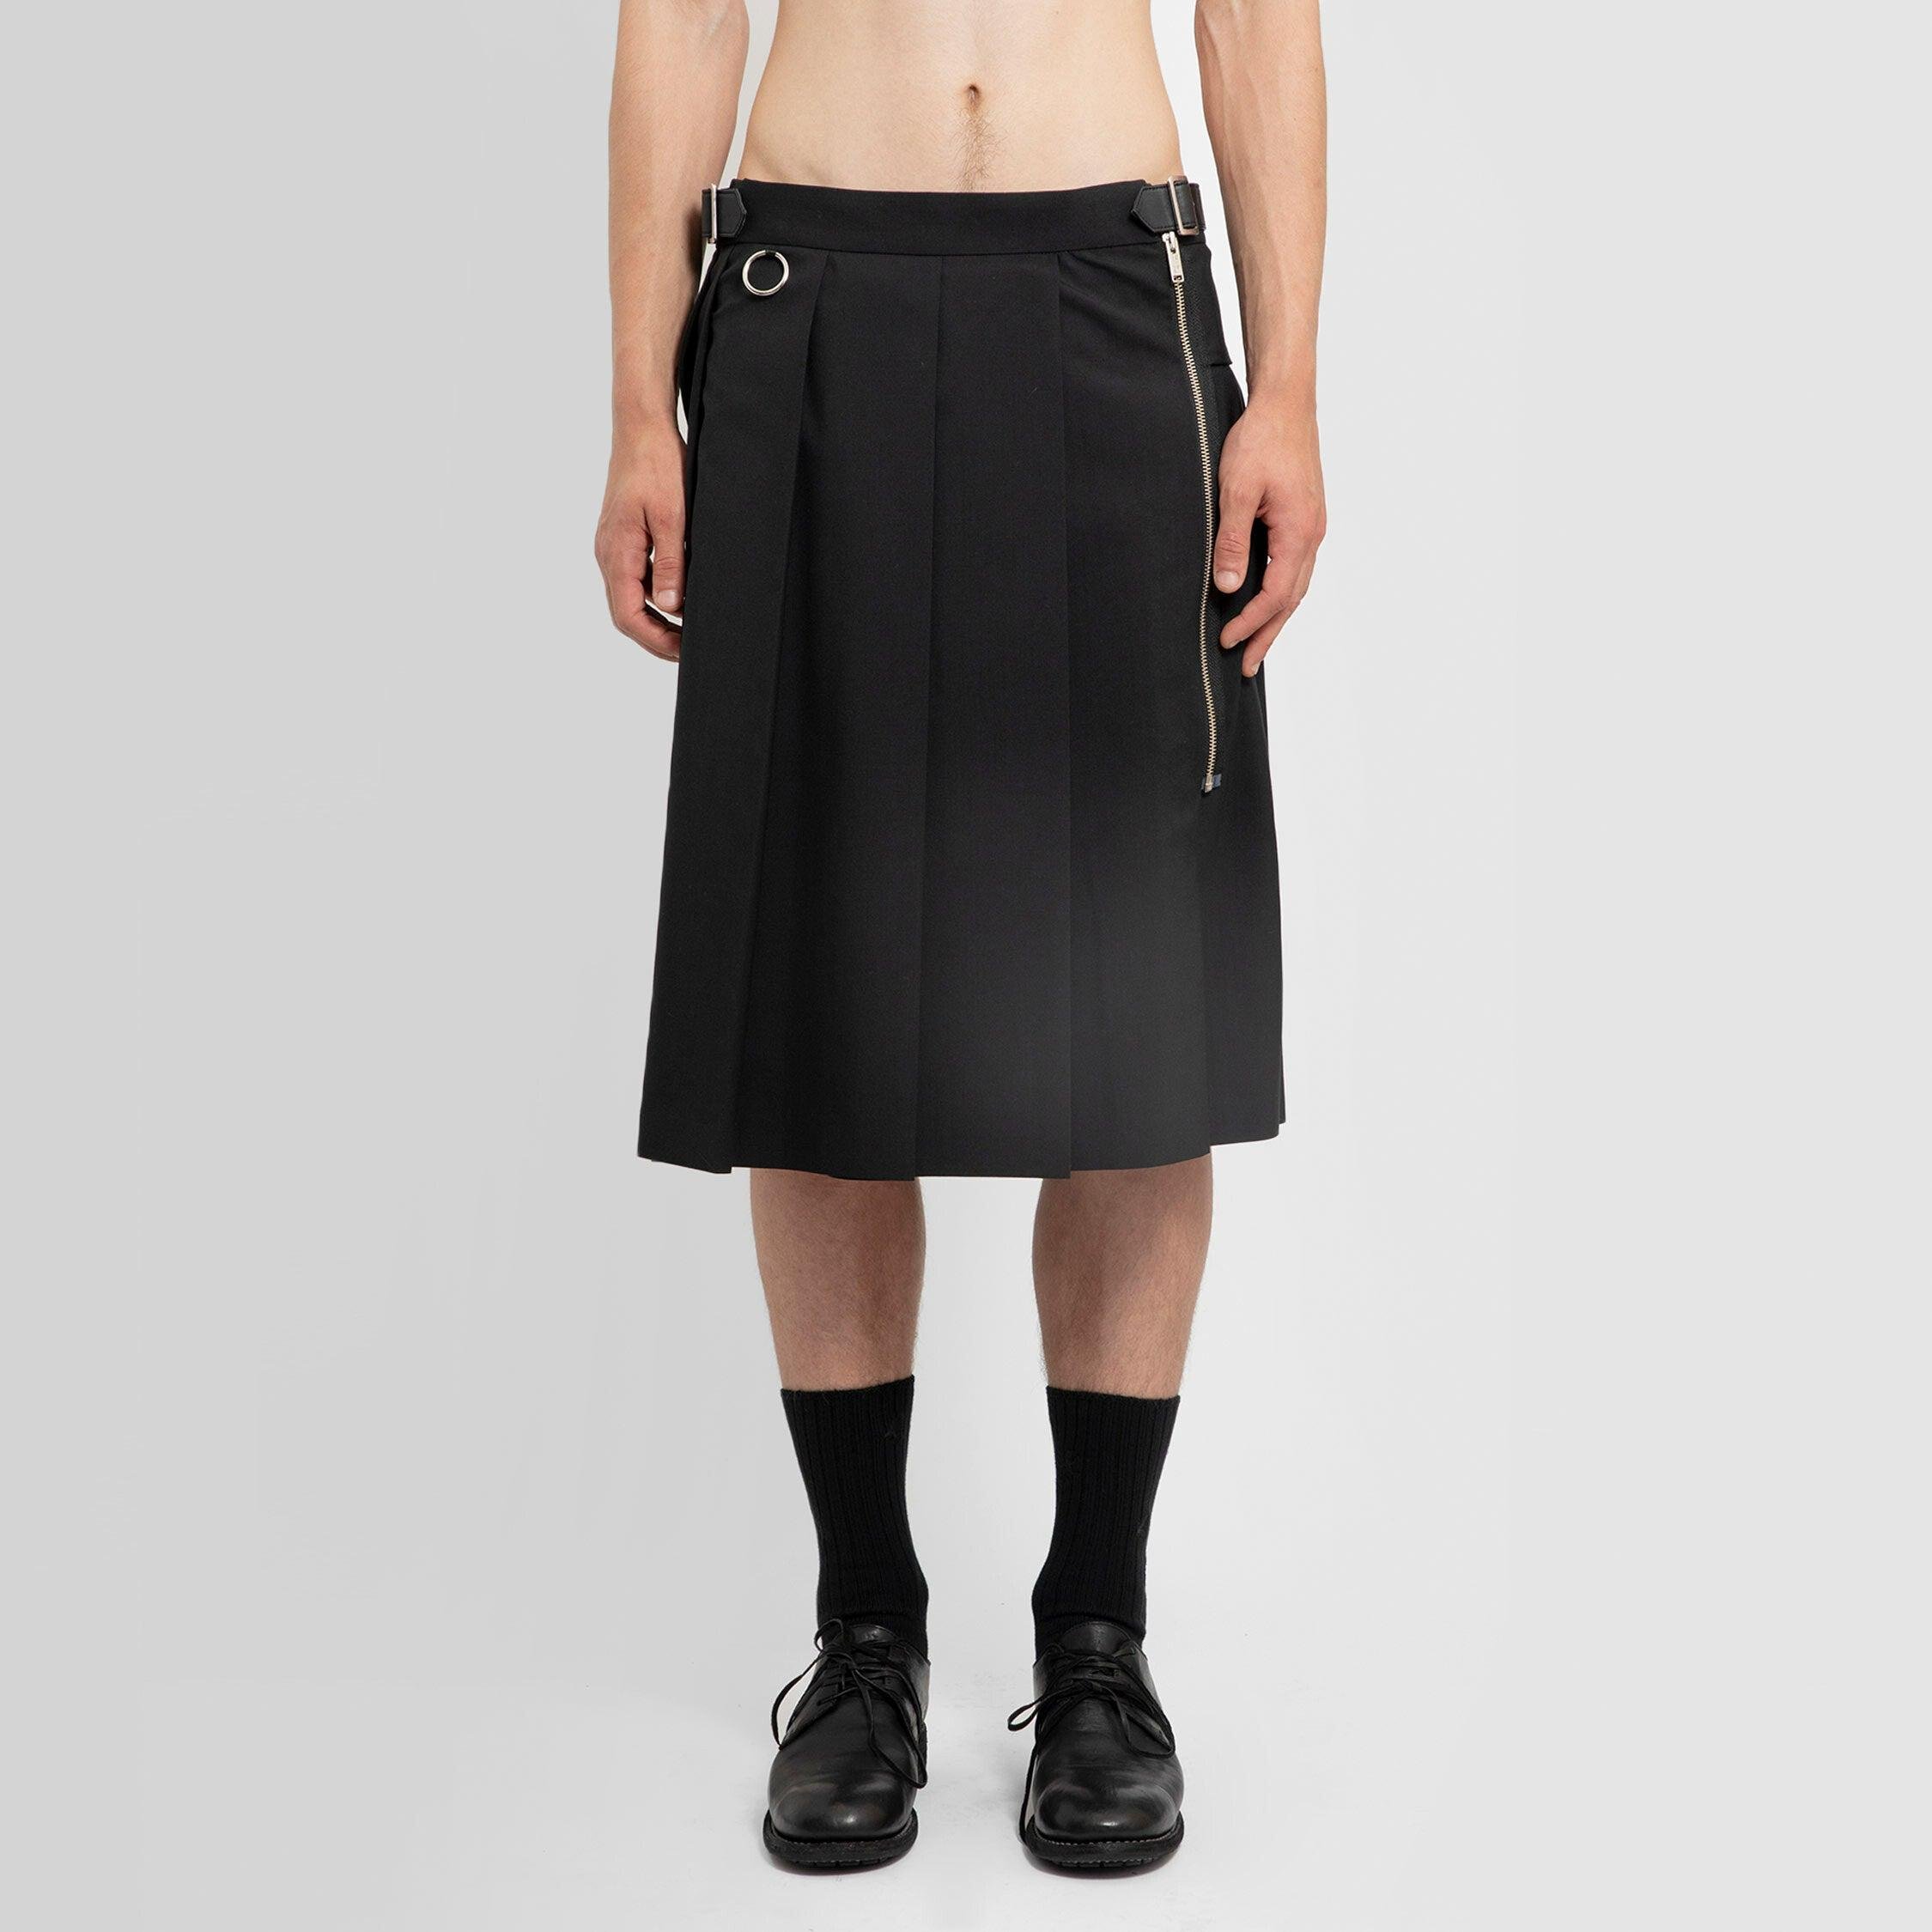 UNDERCOVER MAN BLACK SKIRTS by UNDERCOVER